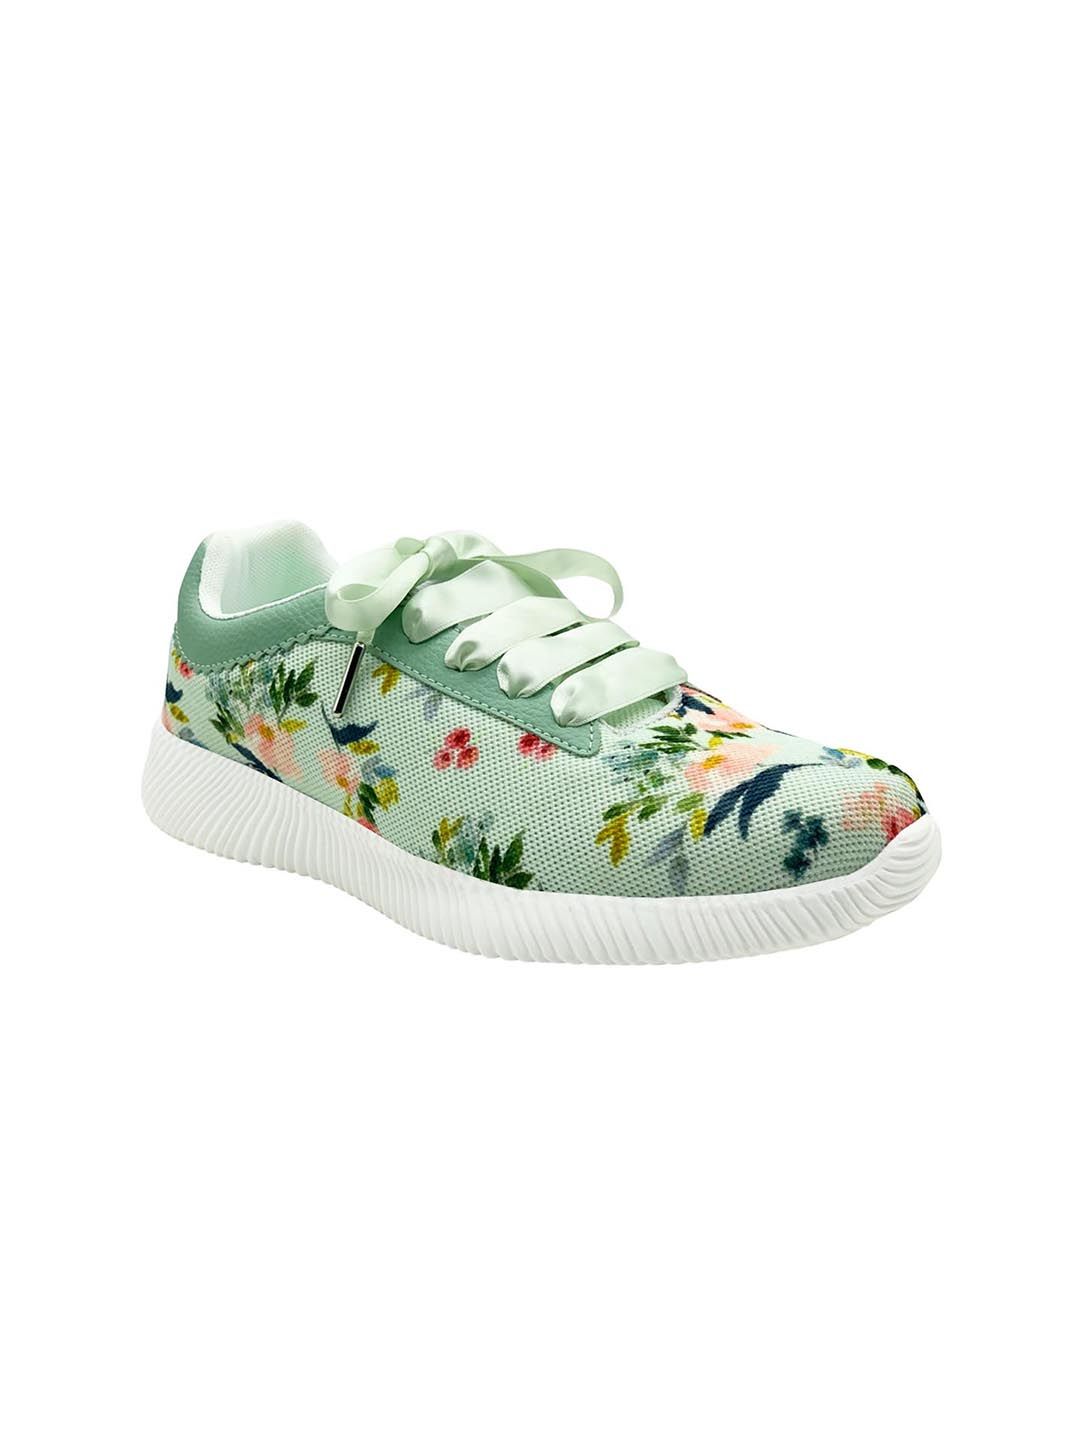 KazarMax Women Green & Pink Floral Print Training Shoes Price in India